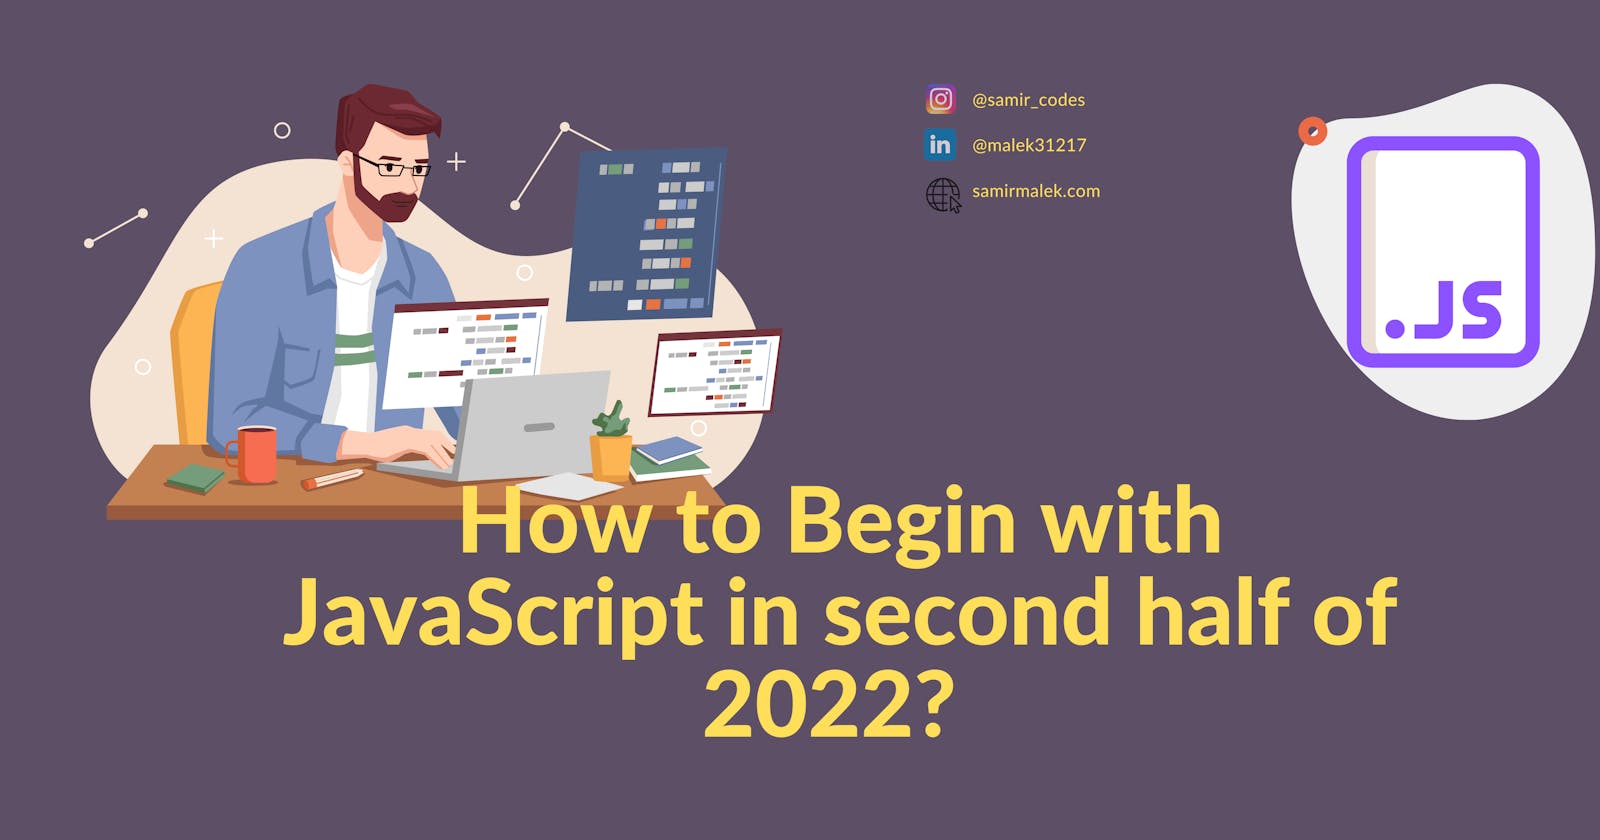 How to Begin with JavaScript in second half of 2022?